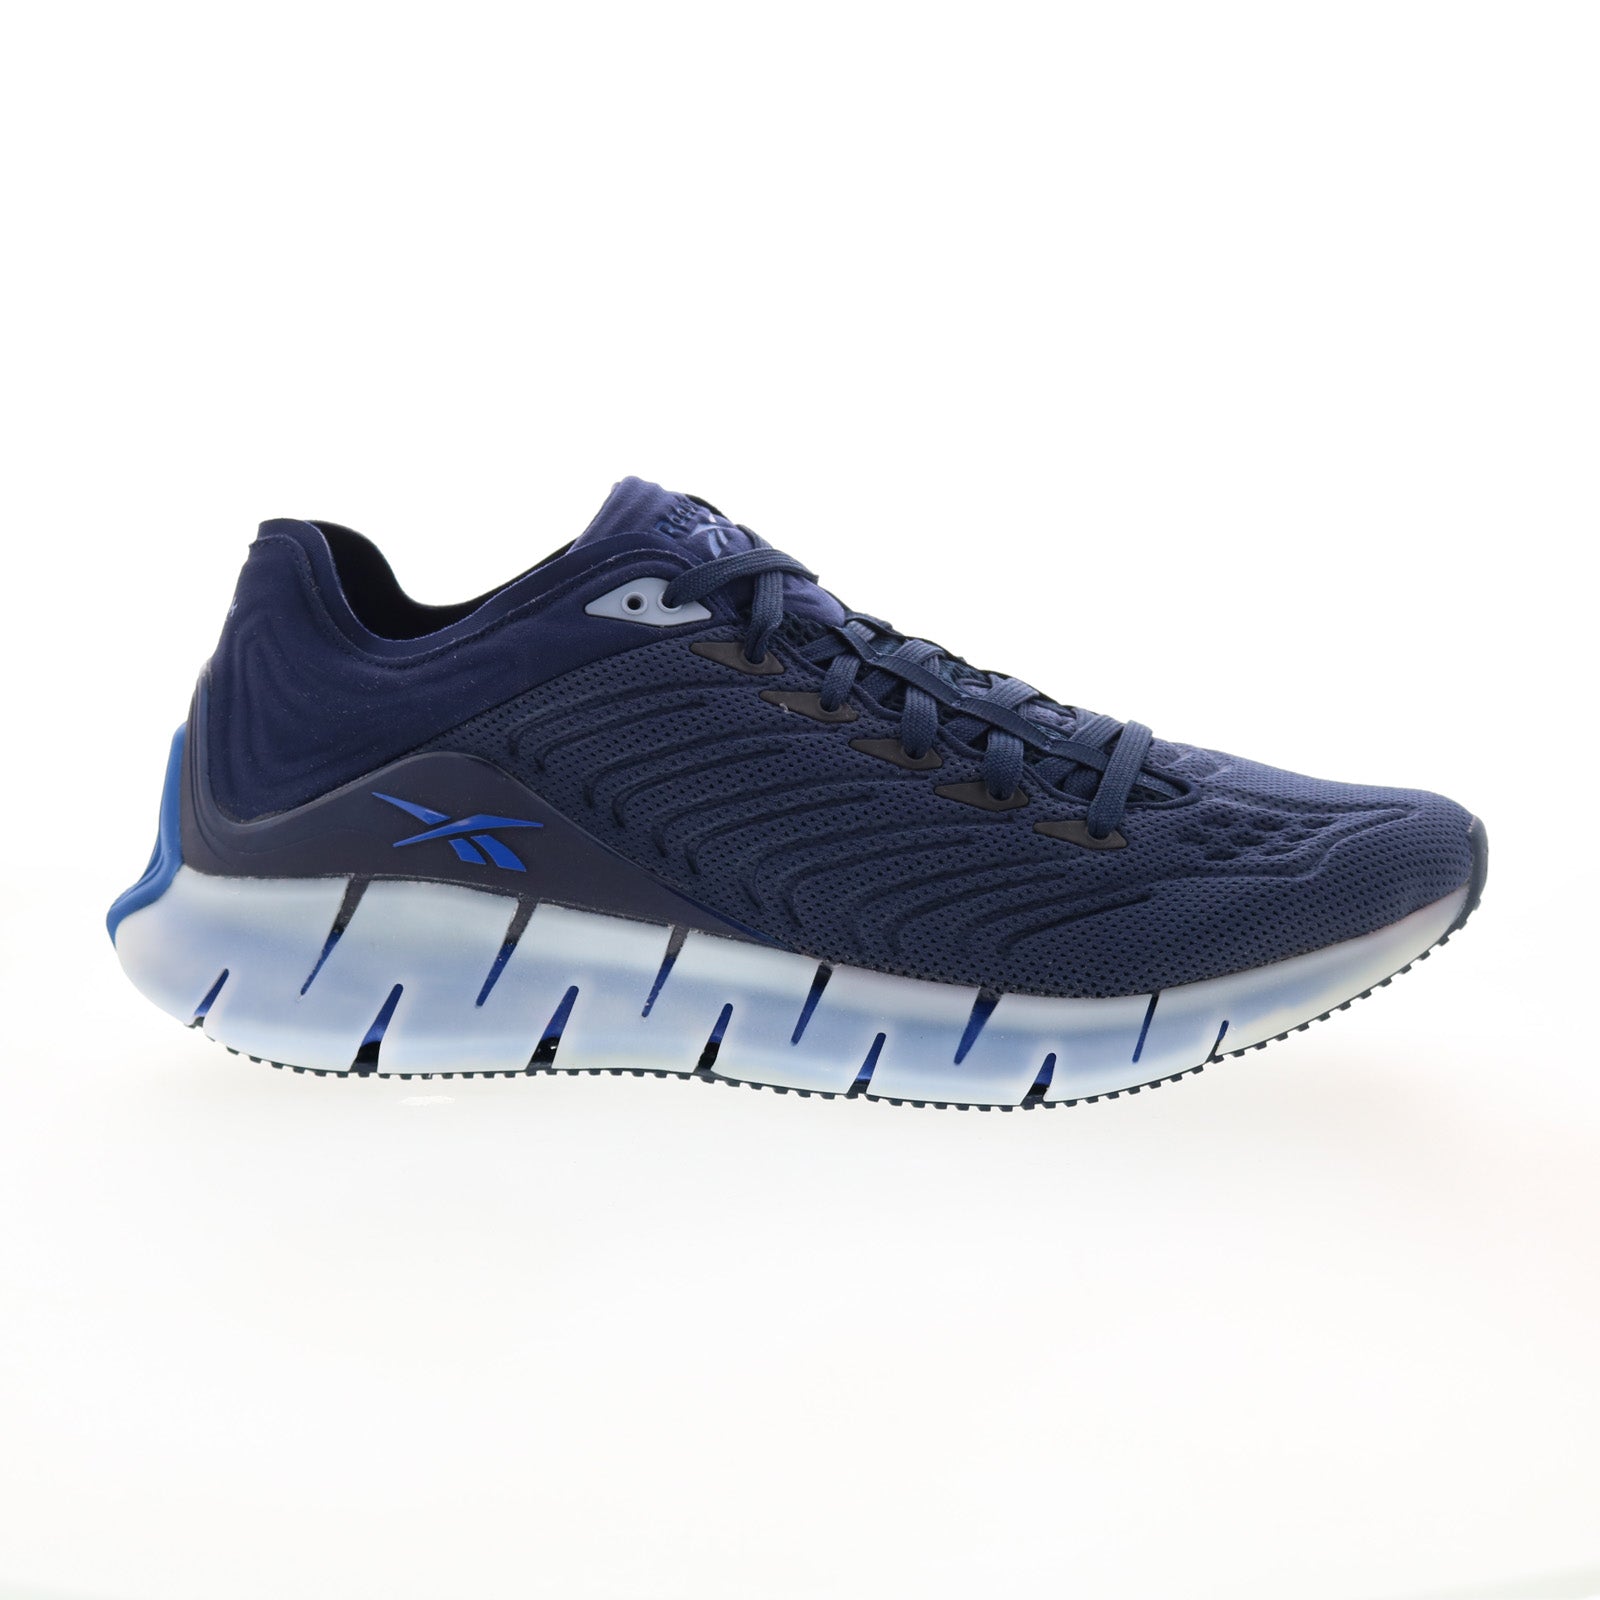 Reebok Zig Shoes - Kinetica Ruze Shoes Running Blue Canvas Mens Athletic FW5292